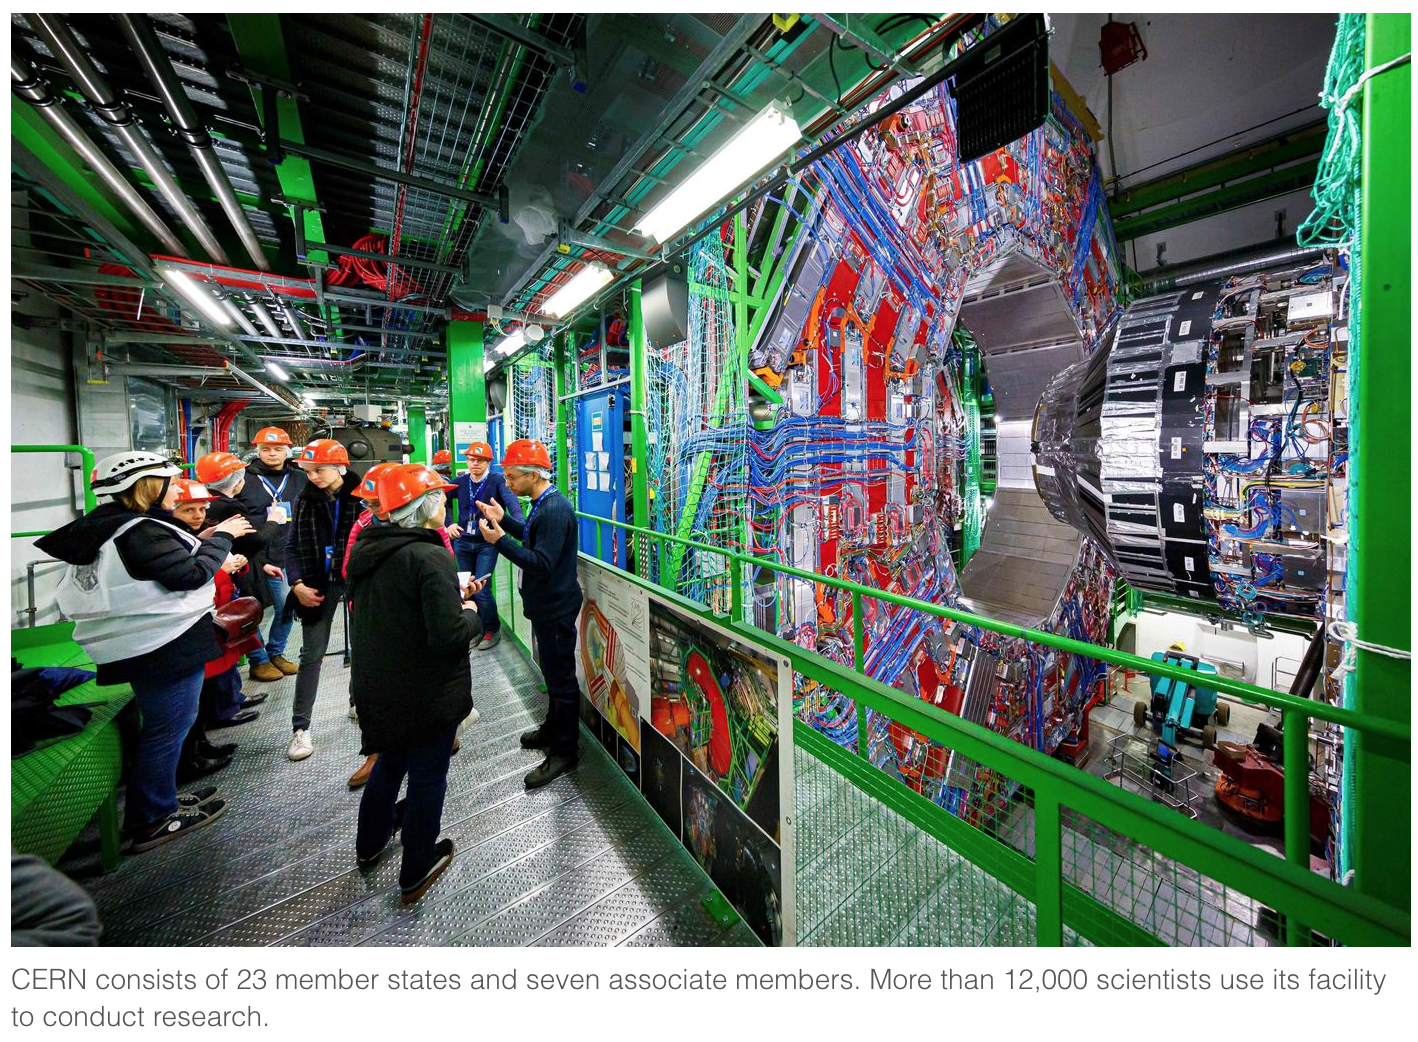 CERN’s Large Hadron Collider To Restart In Bid To Extend Frontiers Of Physics